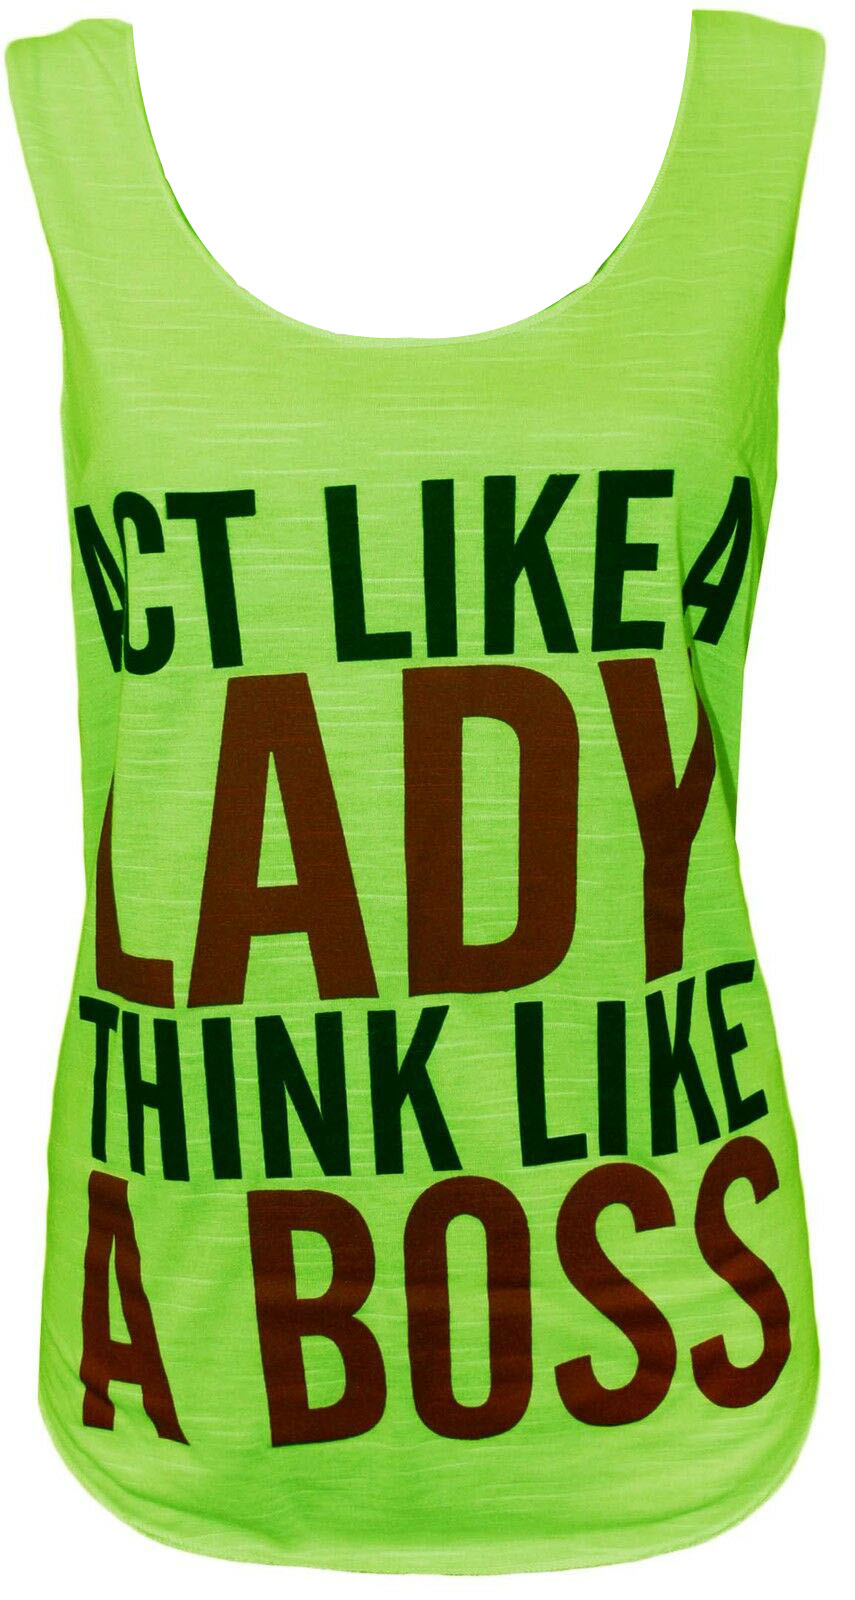 New Women's  [Act Like A Lady Think Like A Boss] Print Vest Top 8-14 [Green]